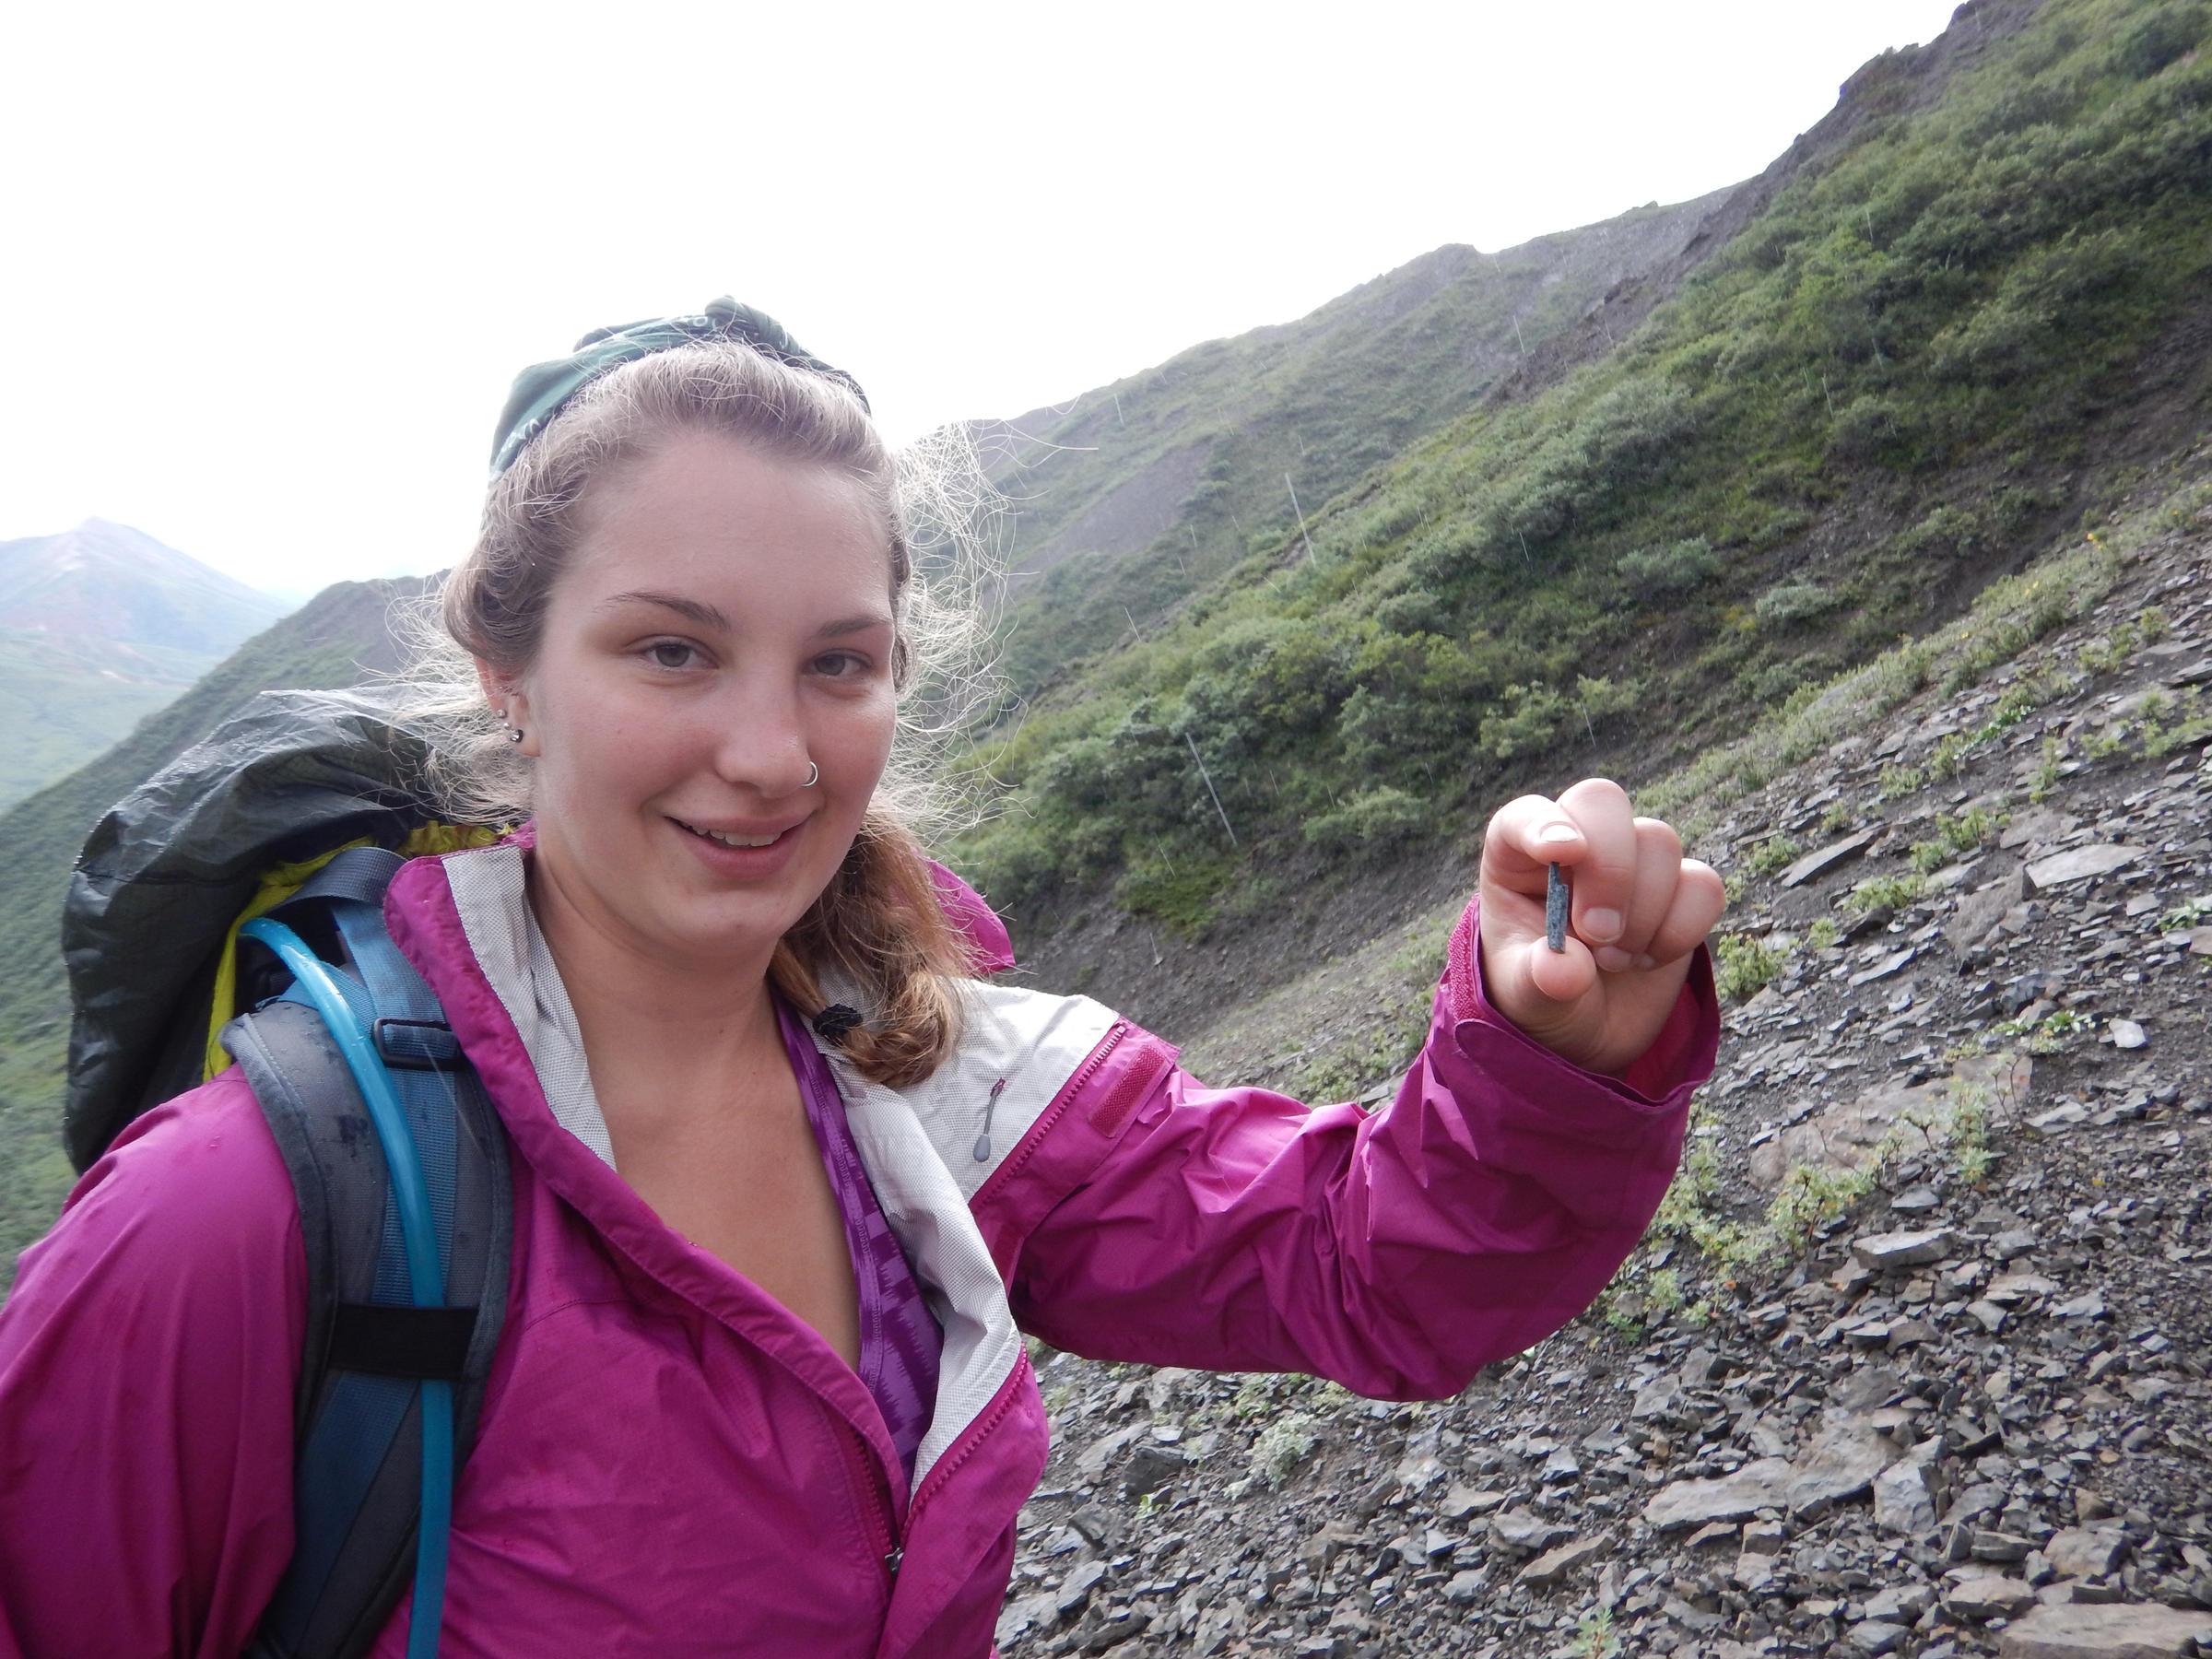 UA Museum of the North curatorial intern Heather MacFarland, who found the first bone, at the site of the discovery in Denali National Park (Photo courtesy of UA Museum of the North)